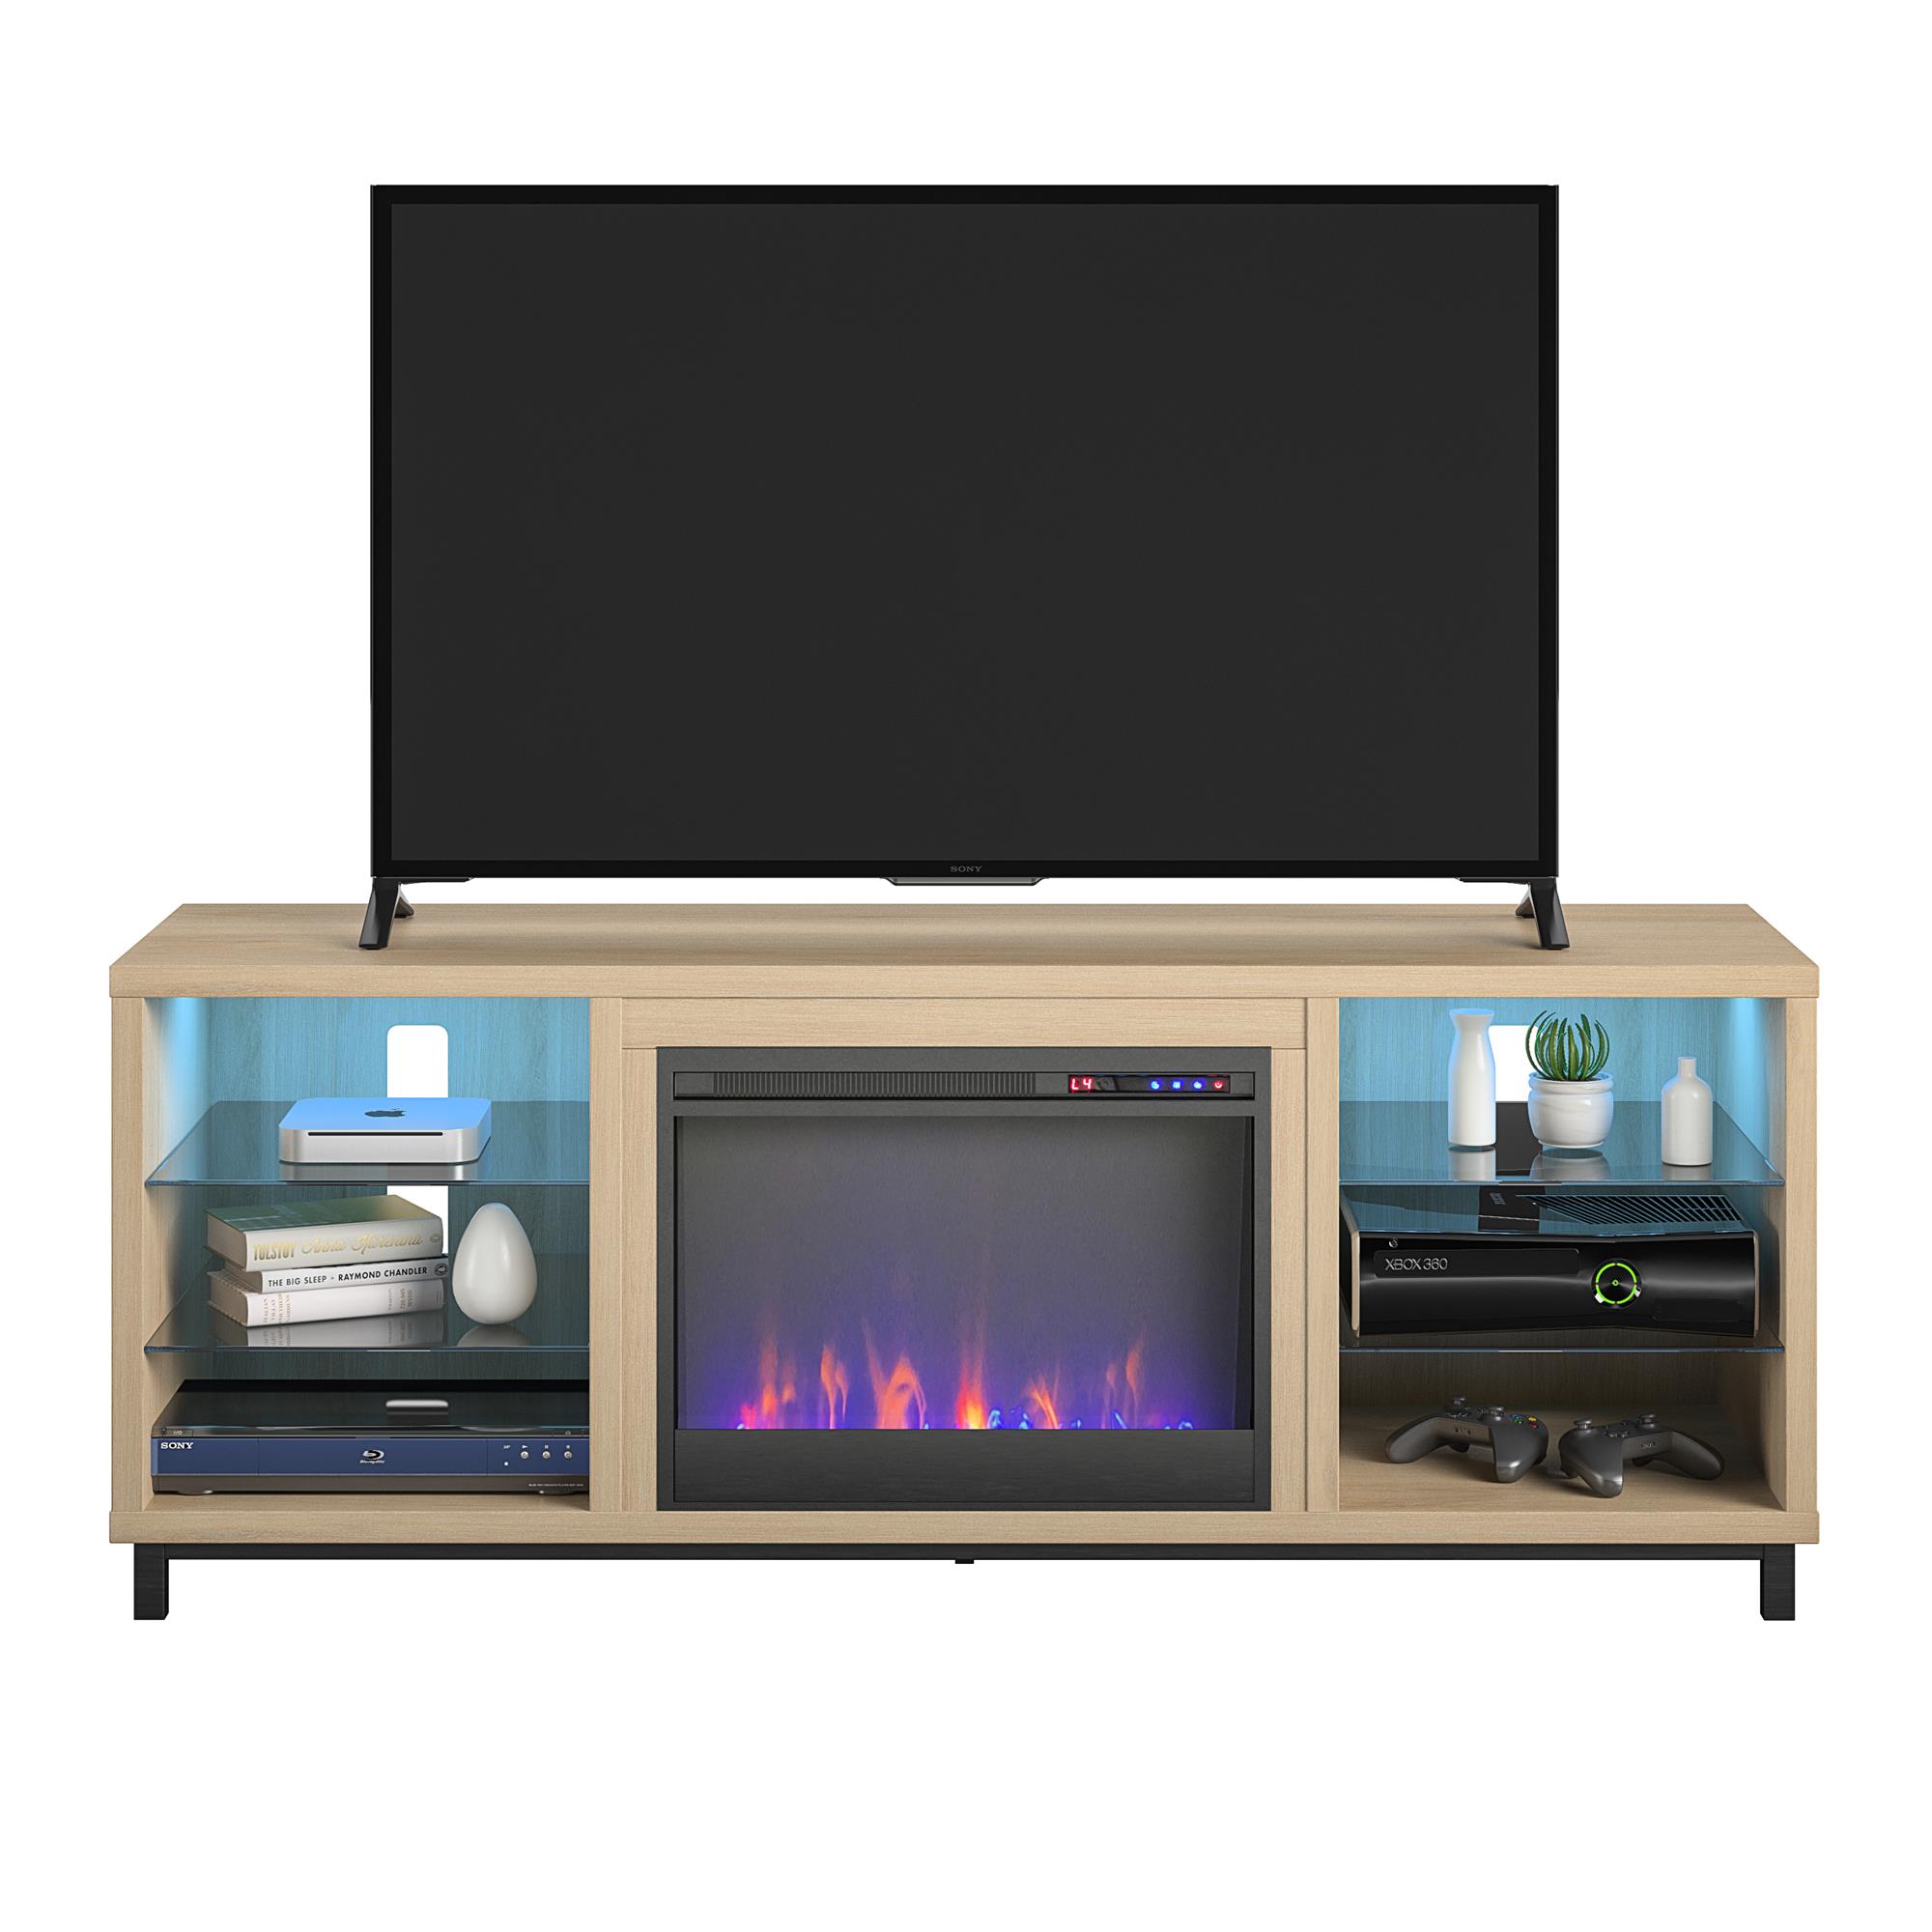 Ameriwood Home Lumina Deluxe Fireplace TV Stand for TVs up to 70", Blonde Oak - image 3 of 20